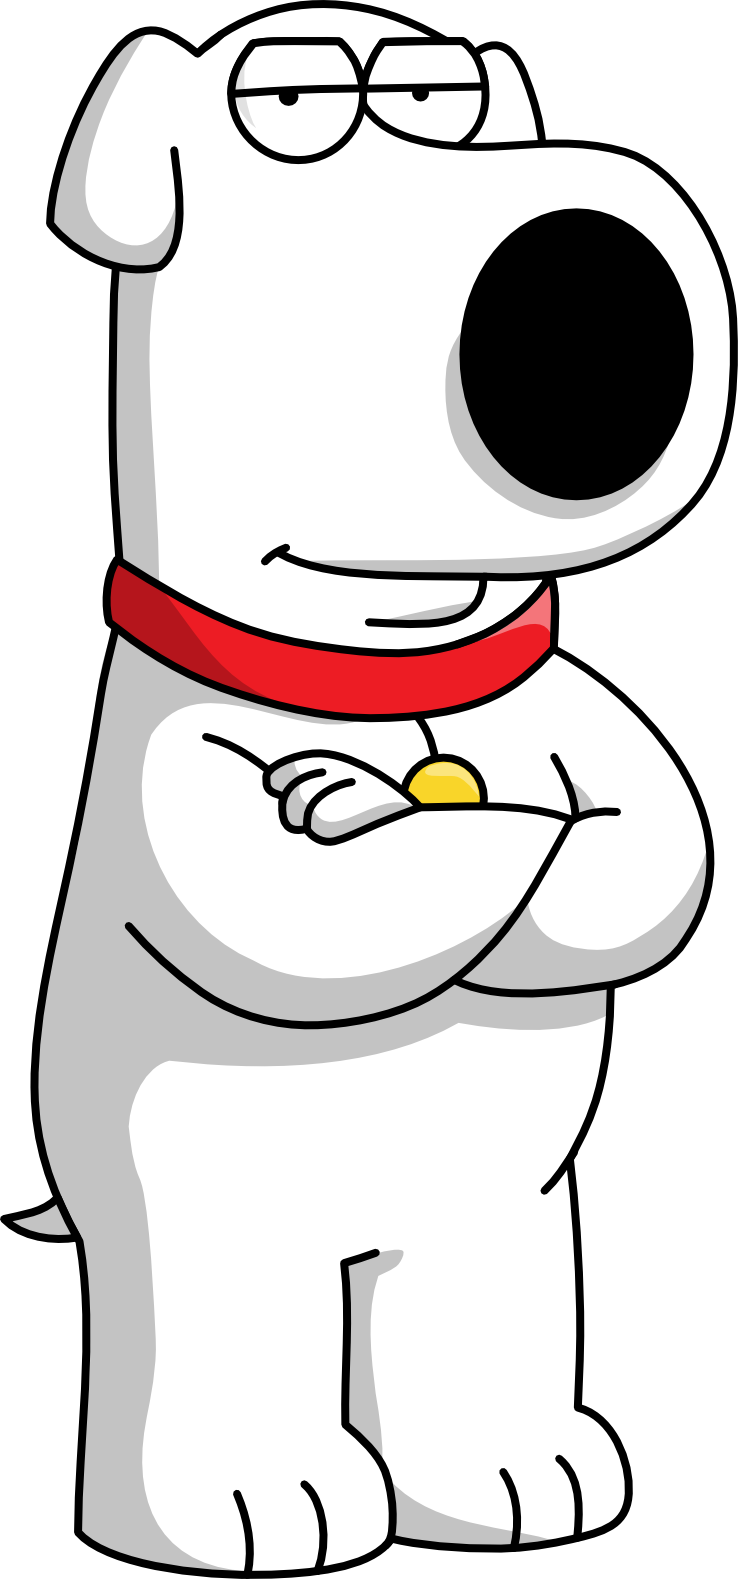 Drivers license clipart family guy. Brian griffin mighty wikia